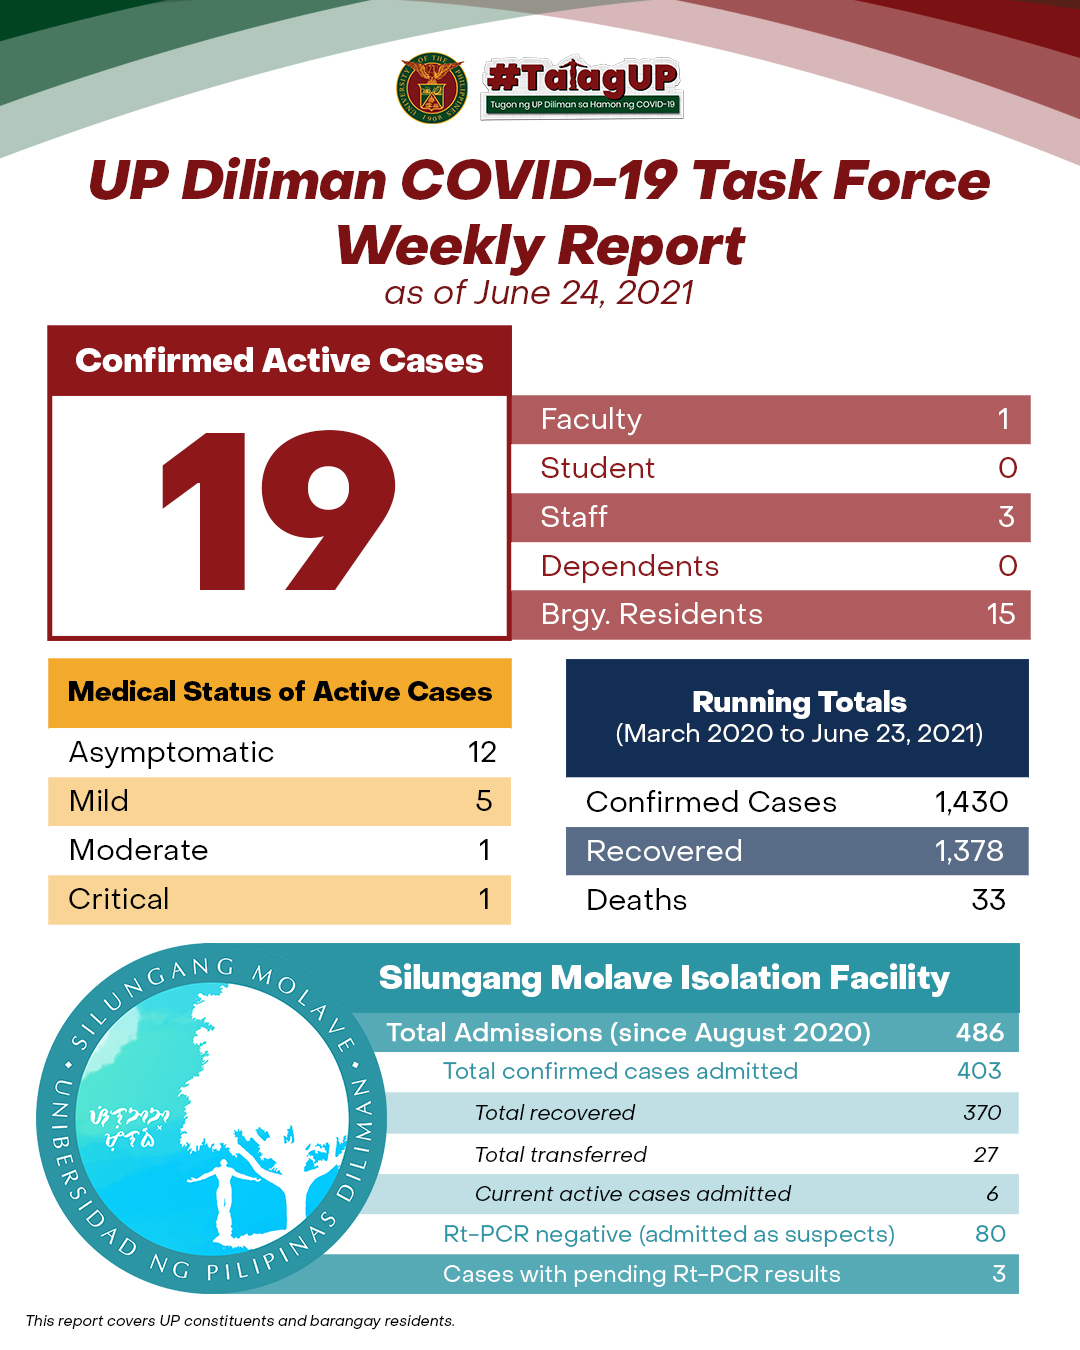 UP Diliman COVID-19 Task Force Weekly Report as of June 24, 2021